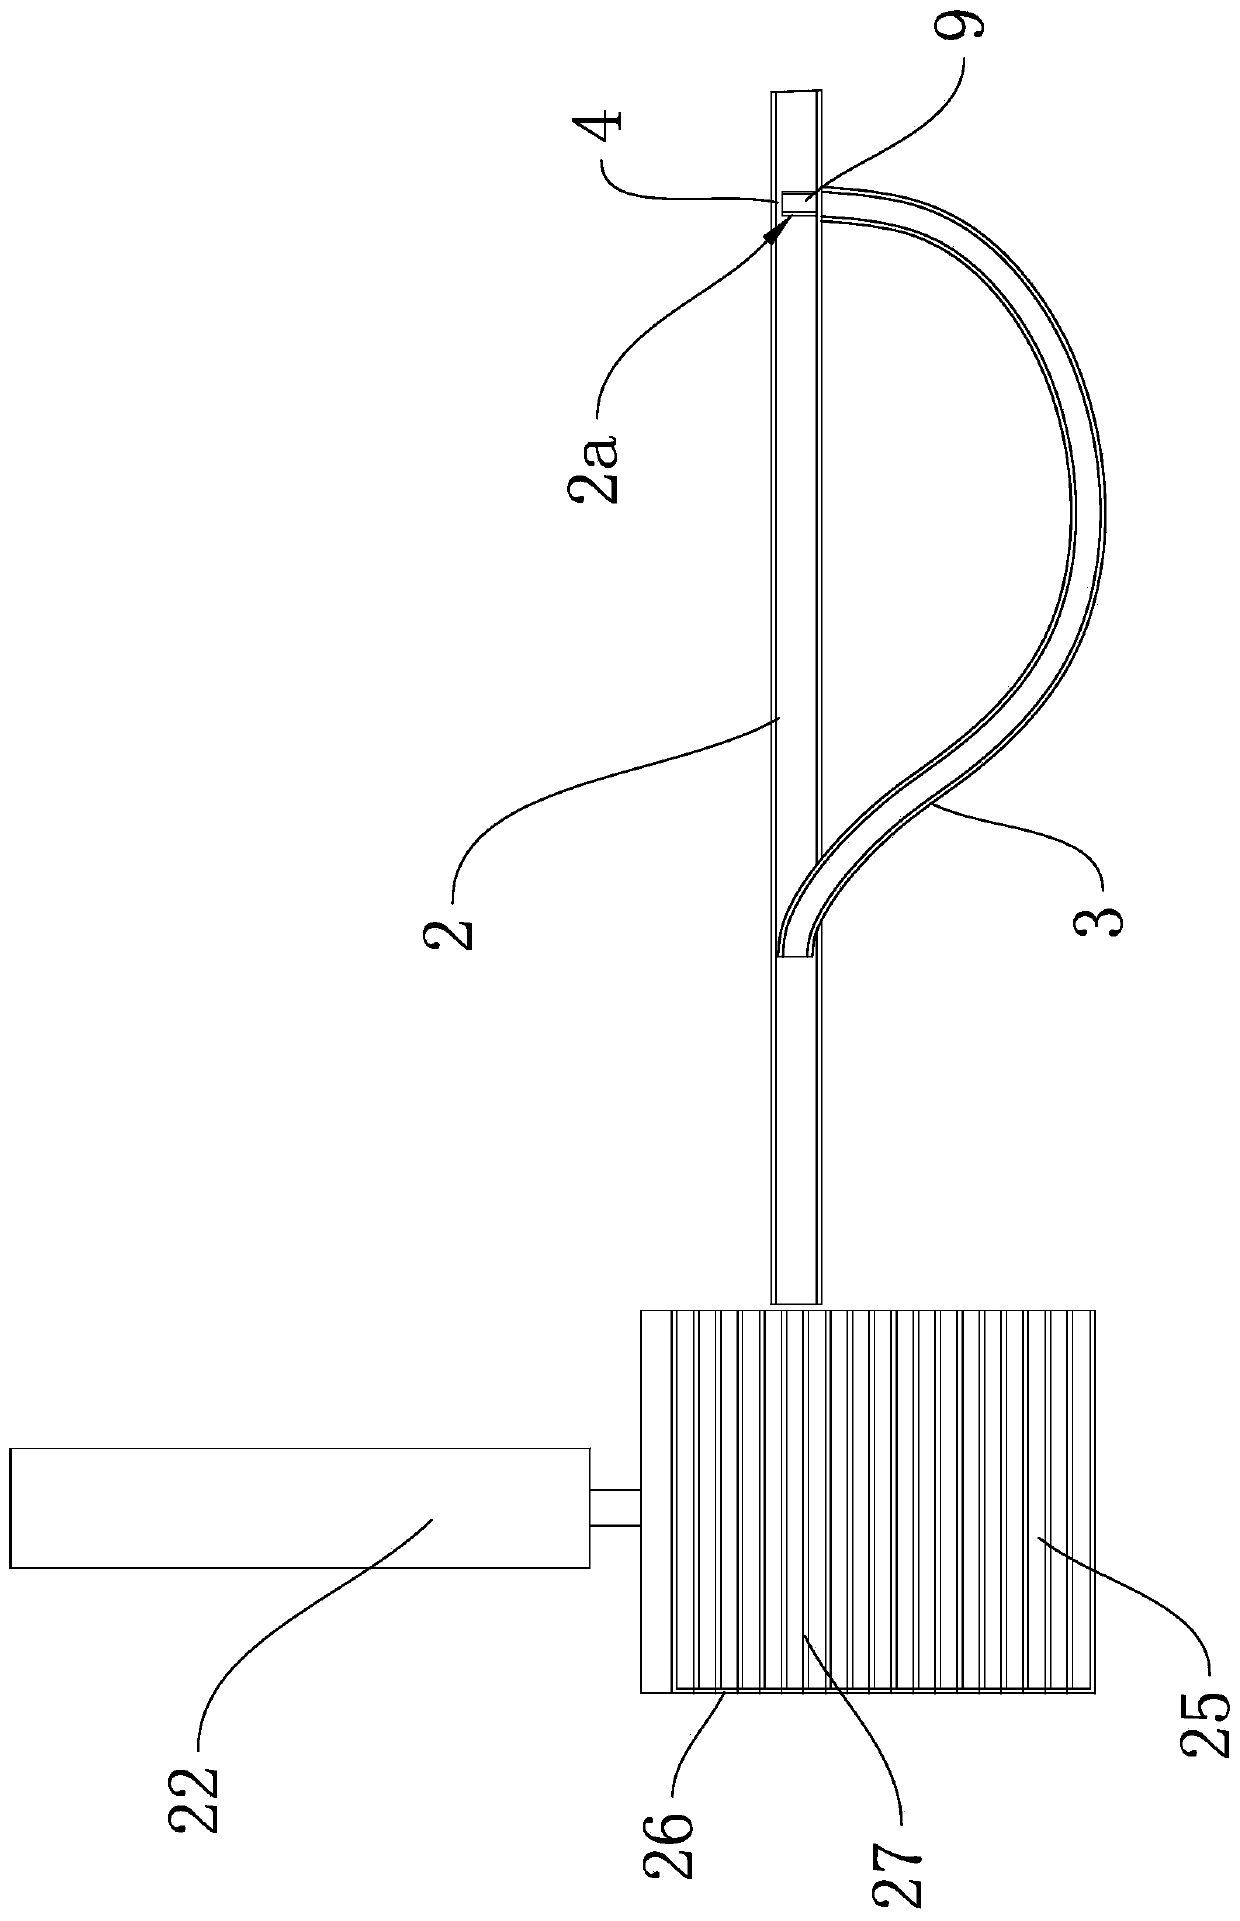 Ferrite sorting and stacking device